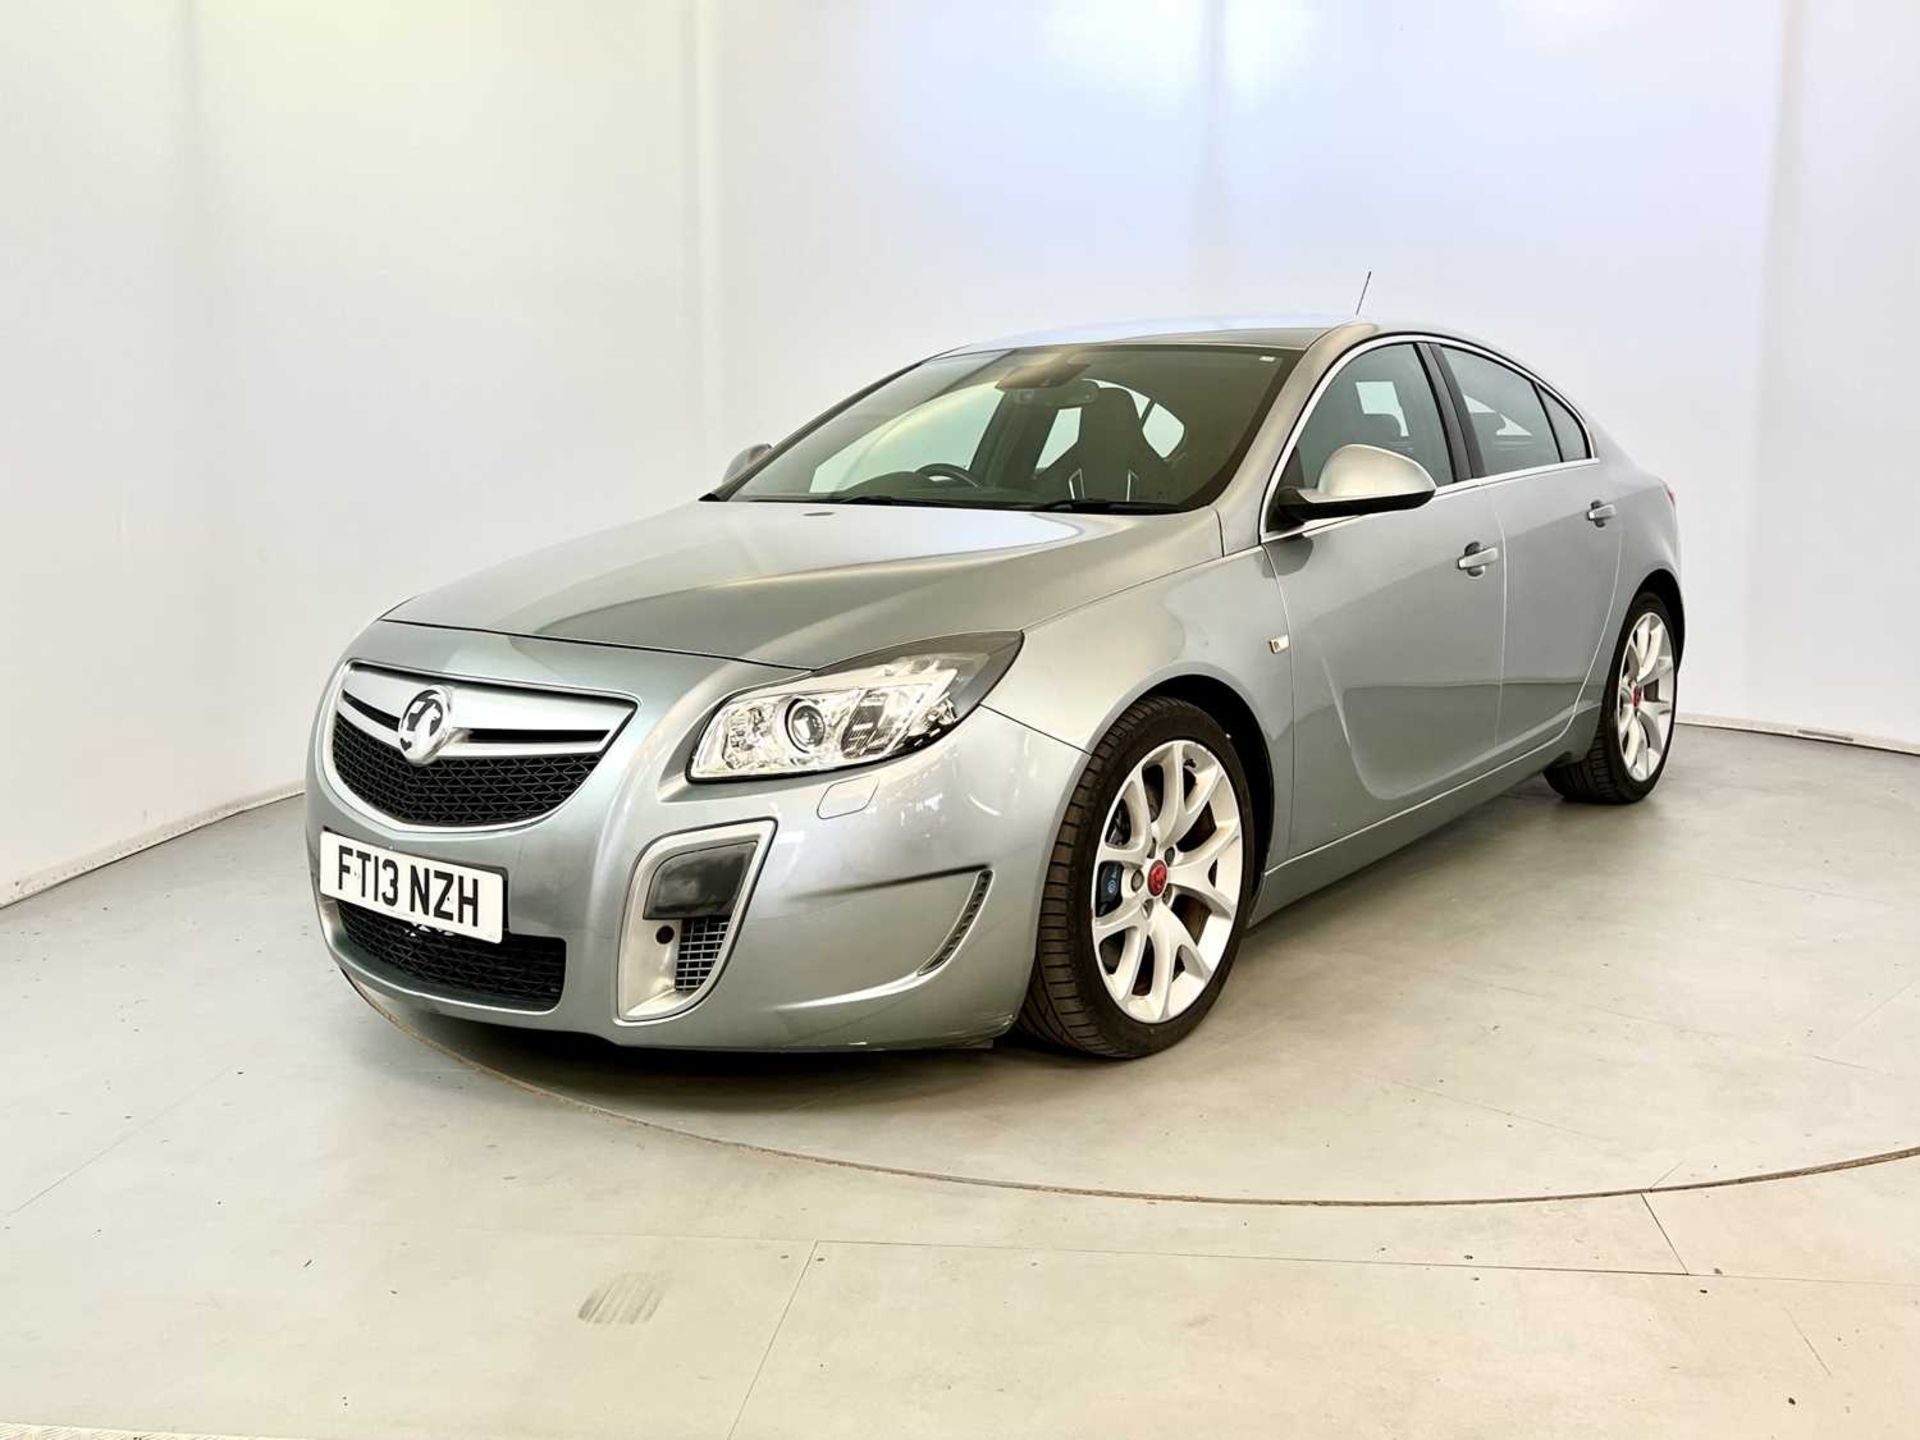 2013 Vauxhall Insignia VXR Supersport - Image 3 of 35